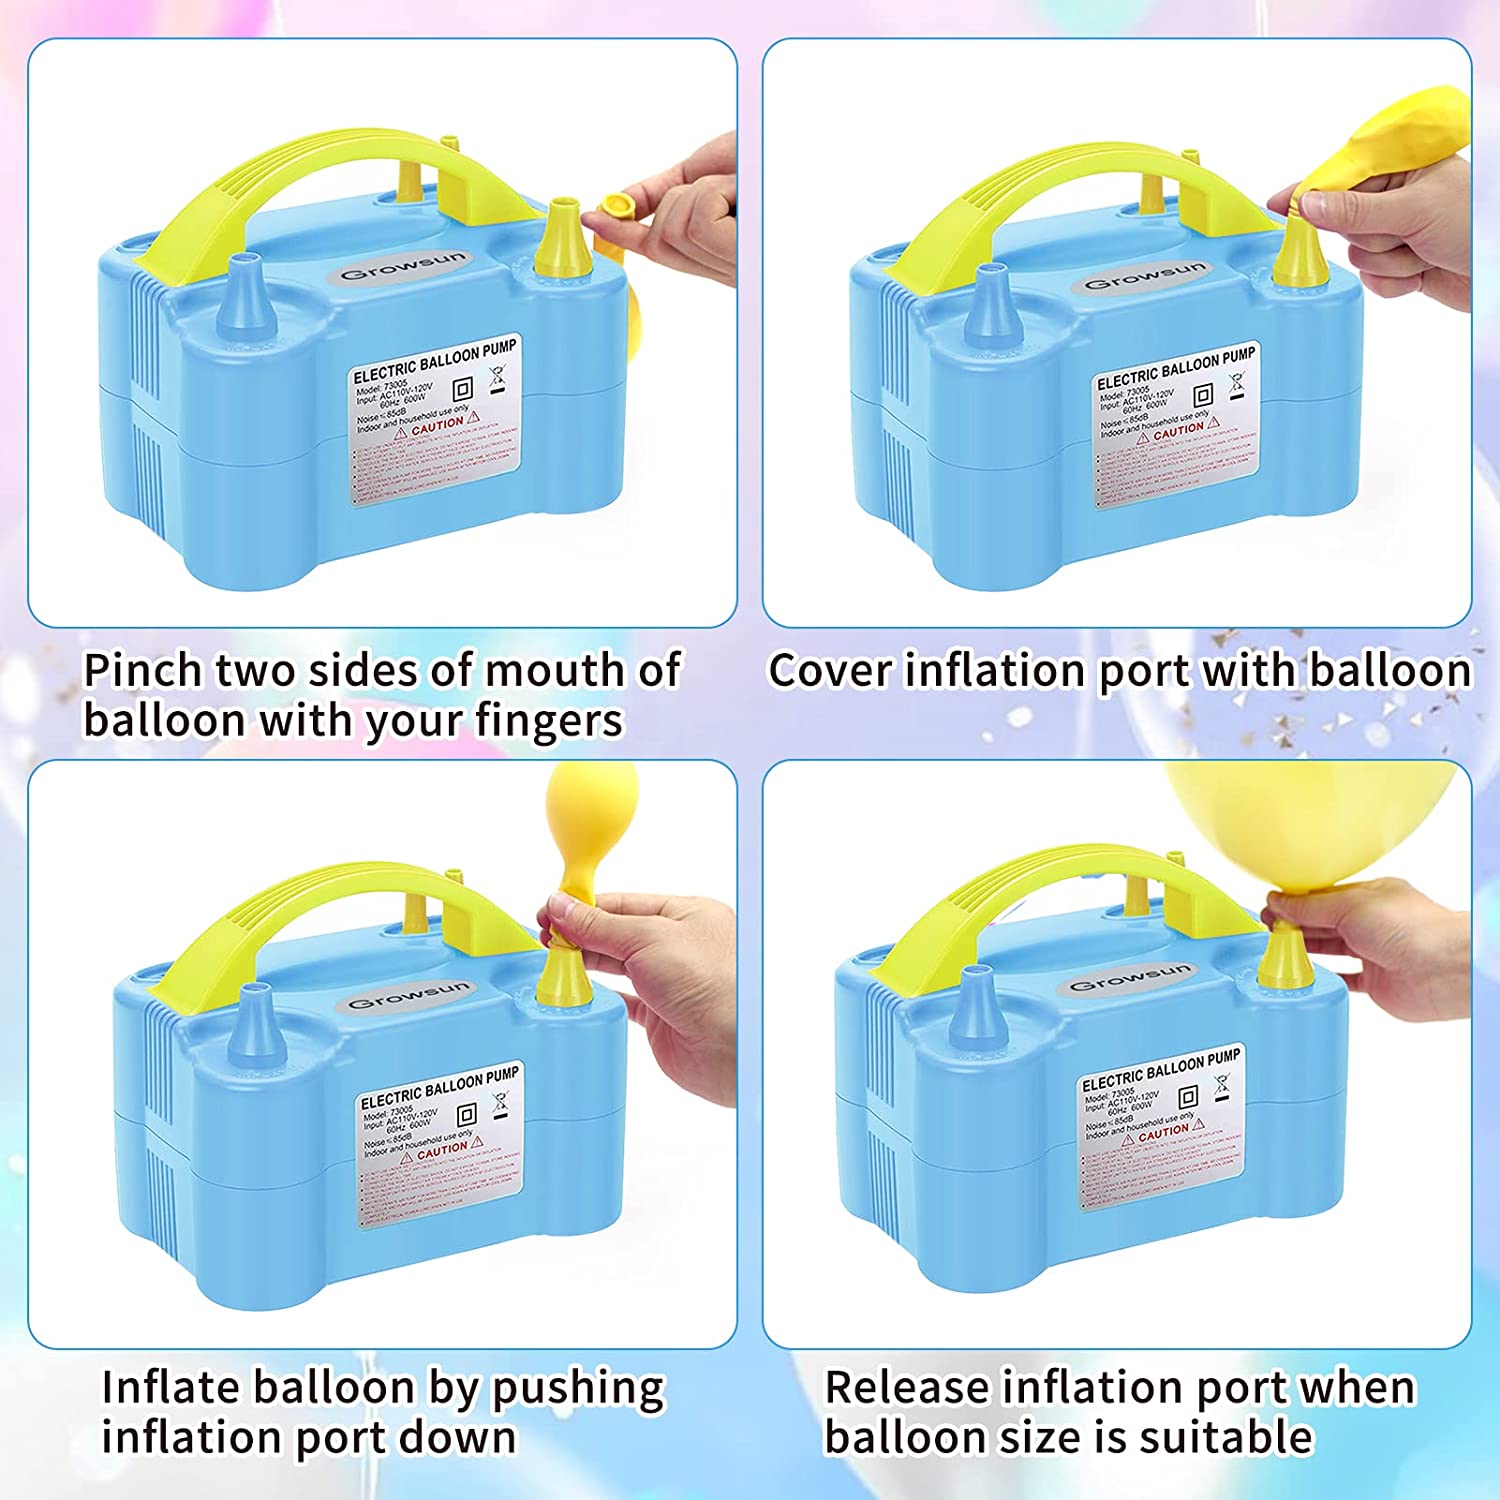 Instructions on how to use an electric balloon pump for blowing up balloons.